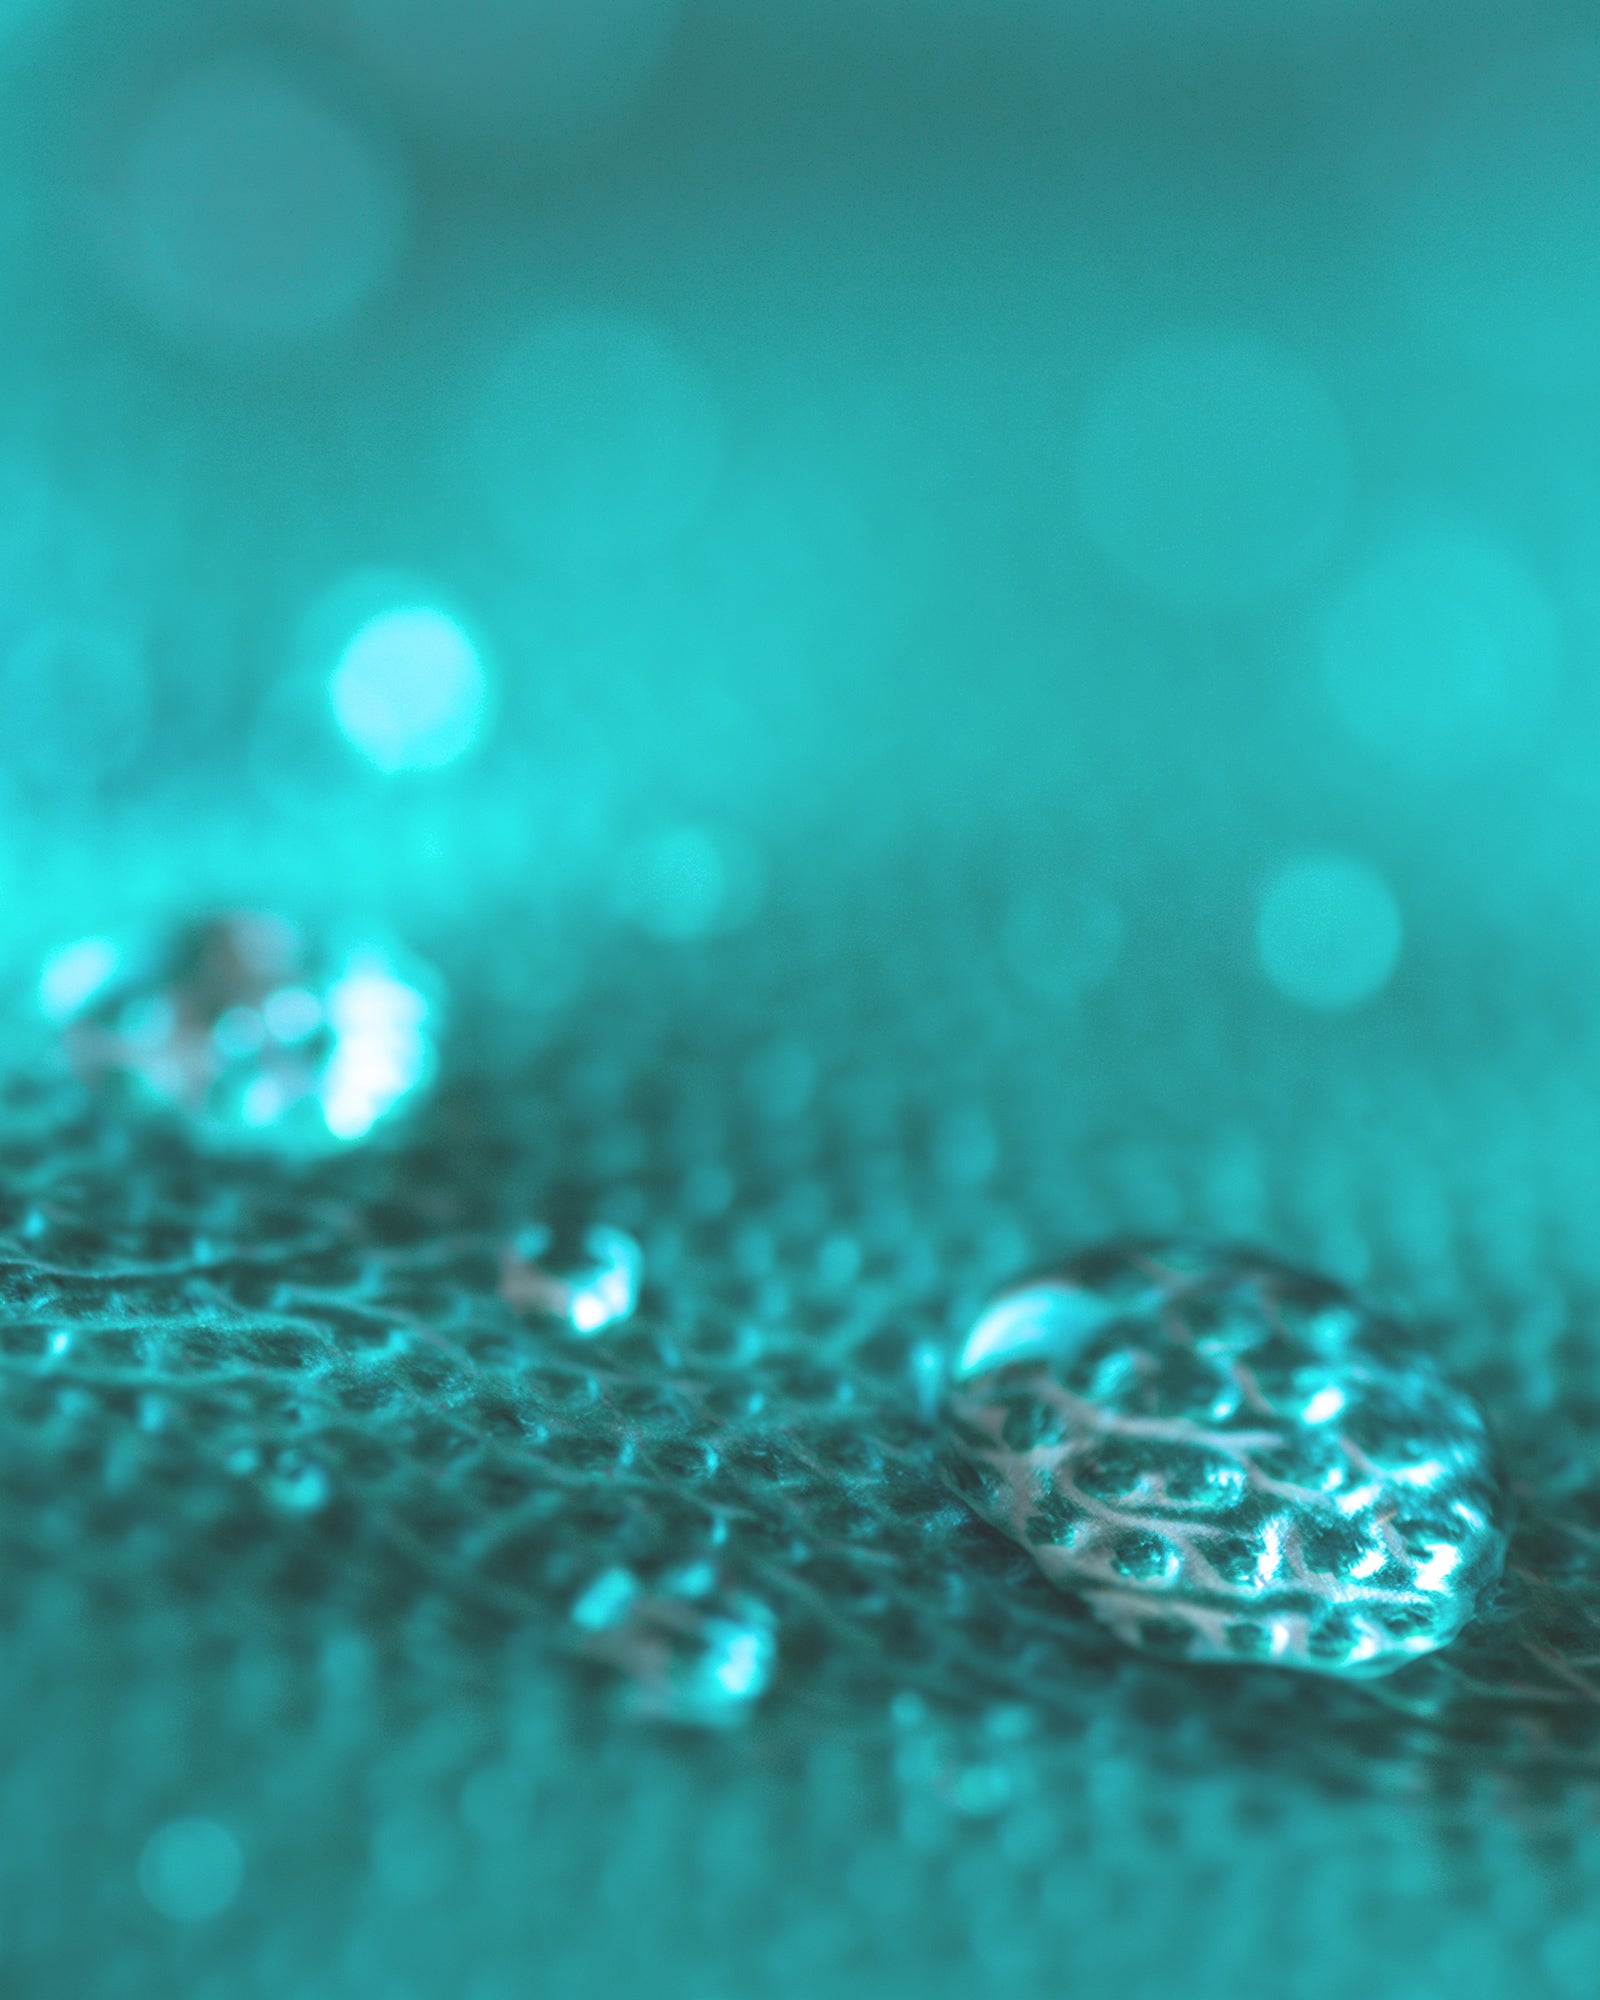 Close-up of water droplets on a teal waterproof background.